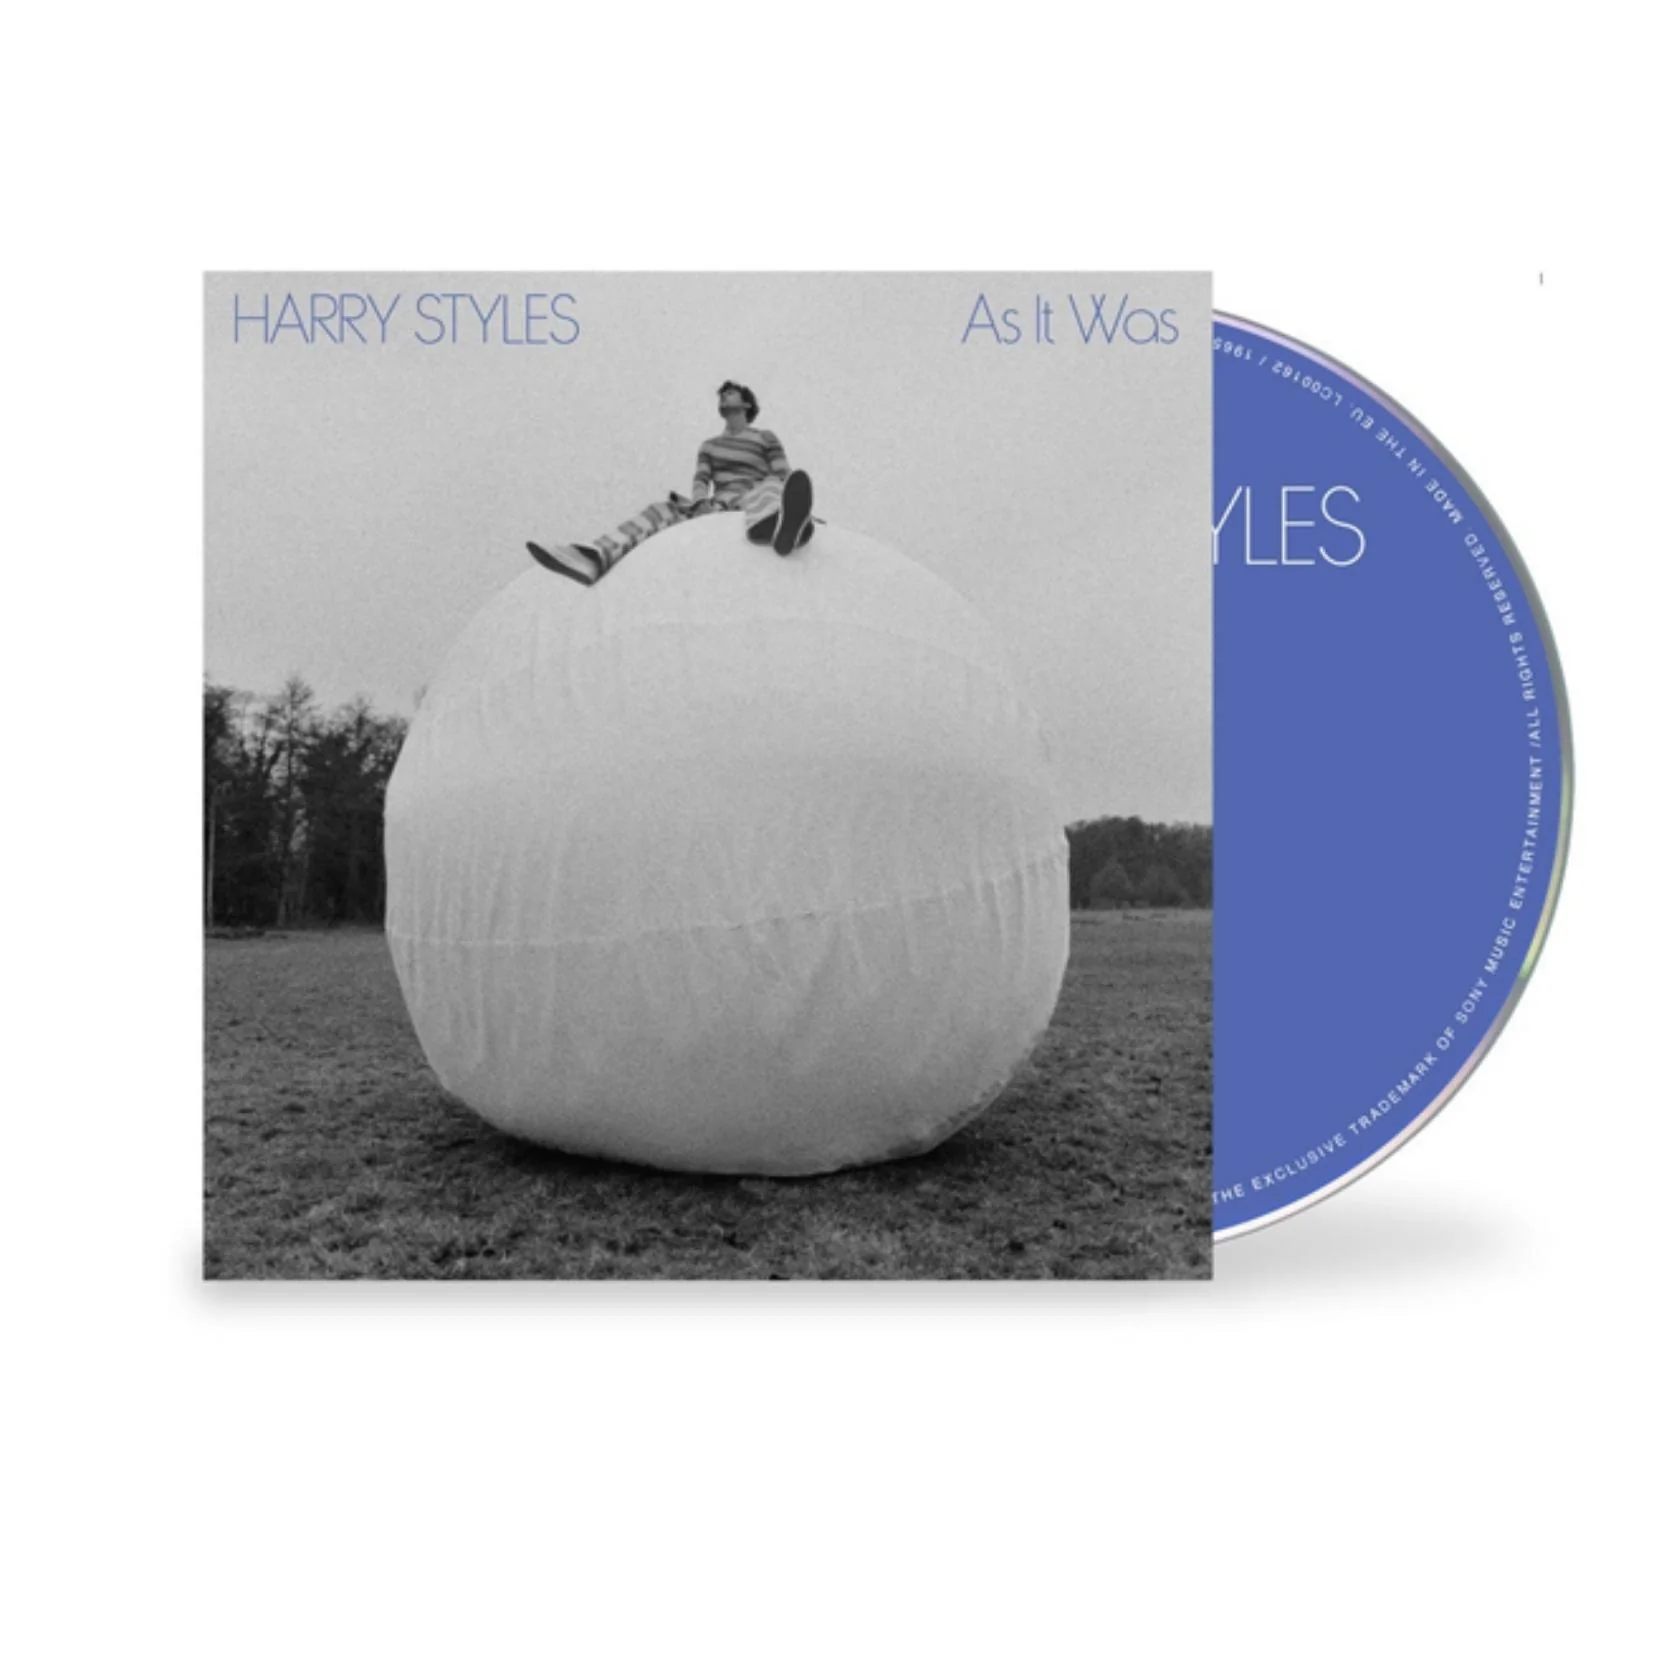 Harry Styles - As It Was (Single) (Hand numbered CDs!)